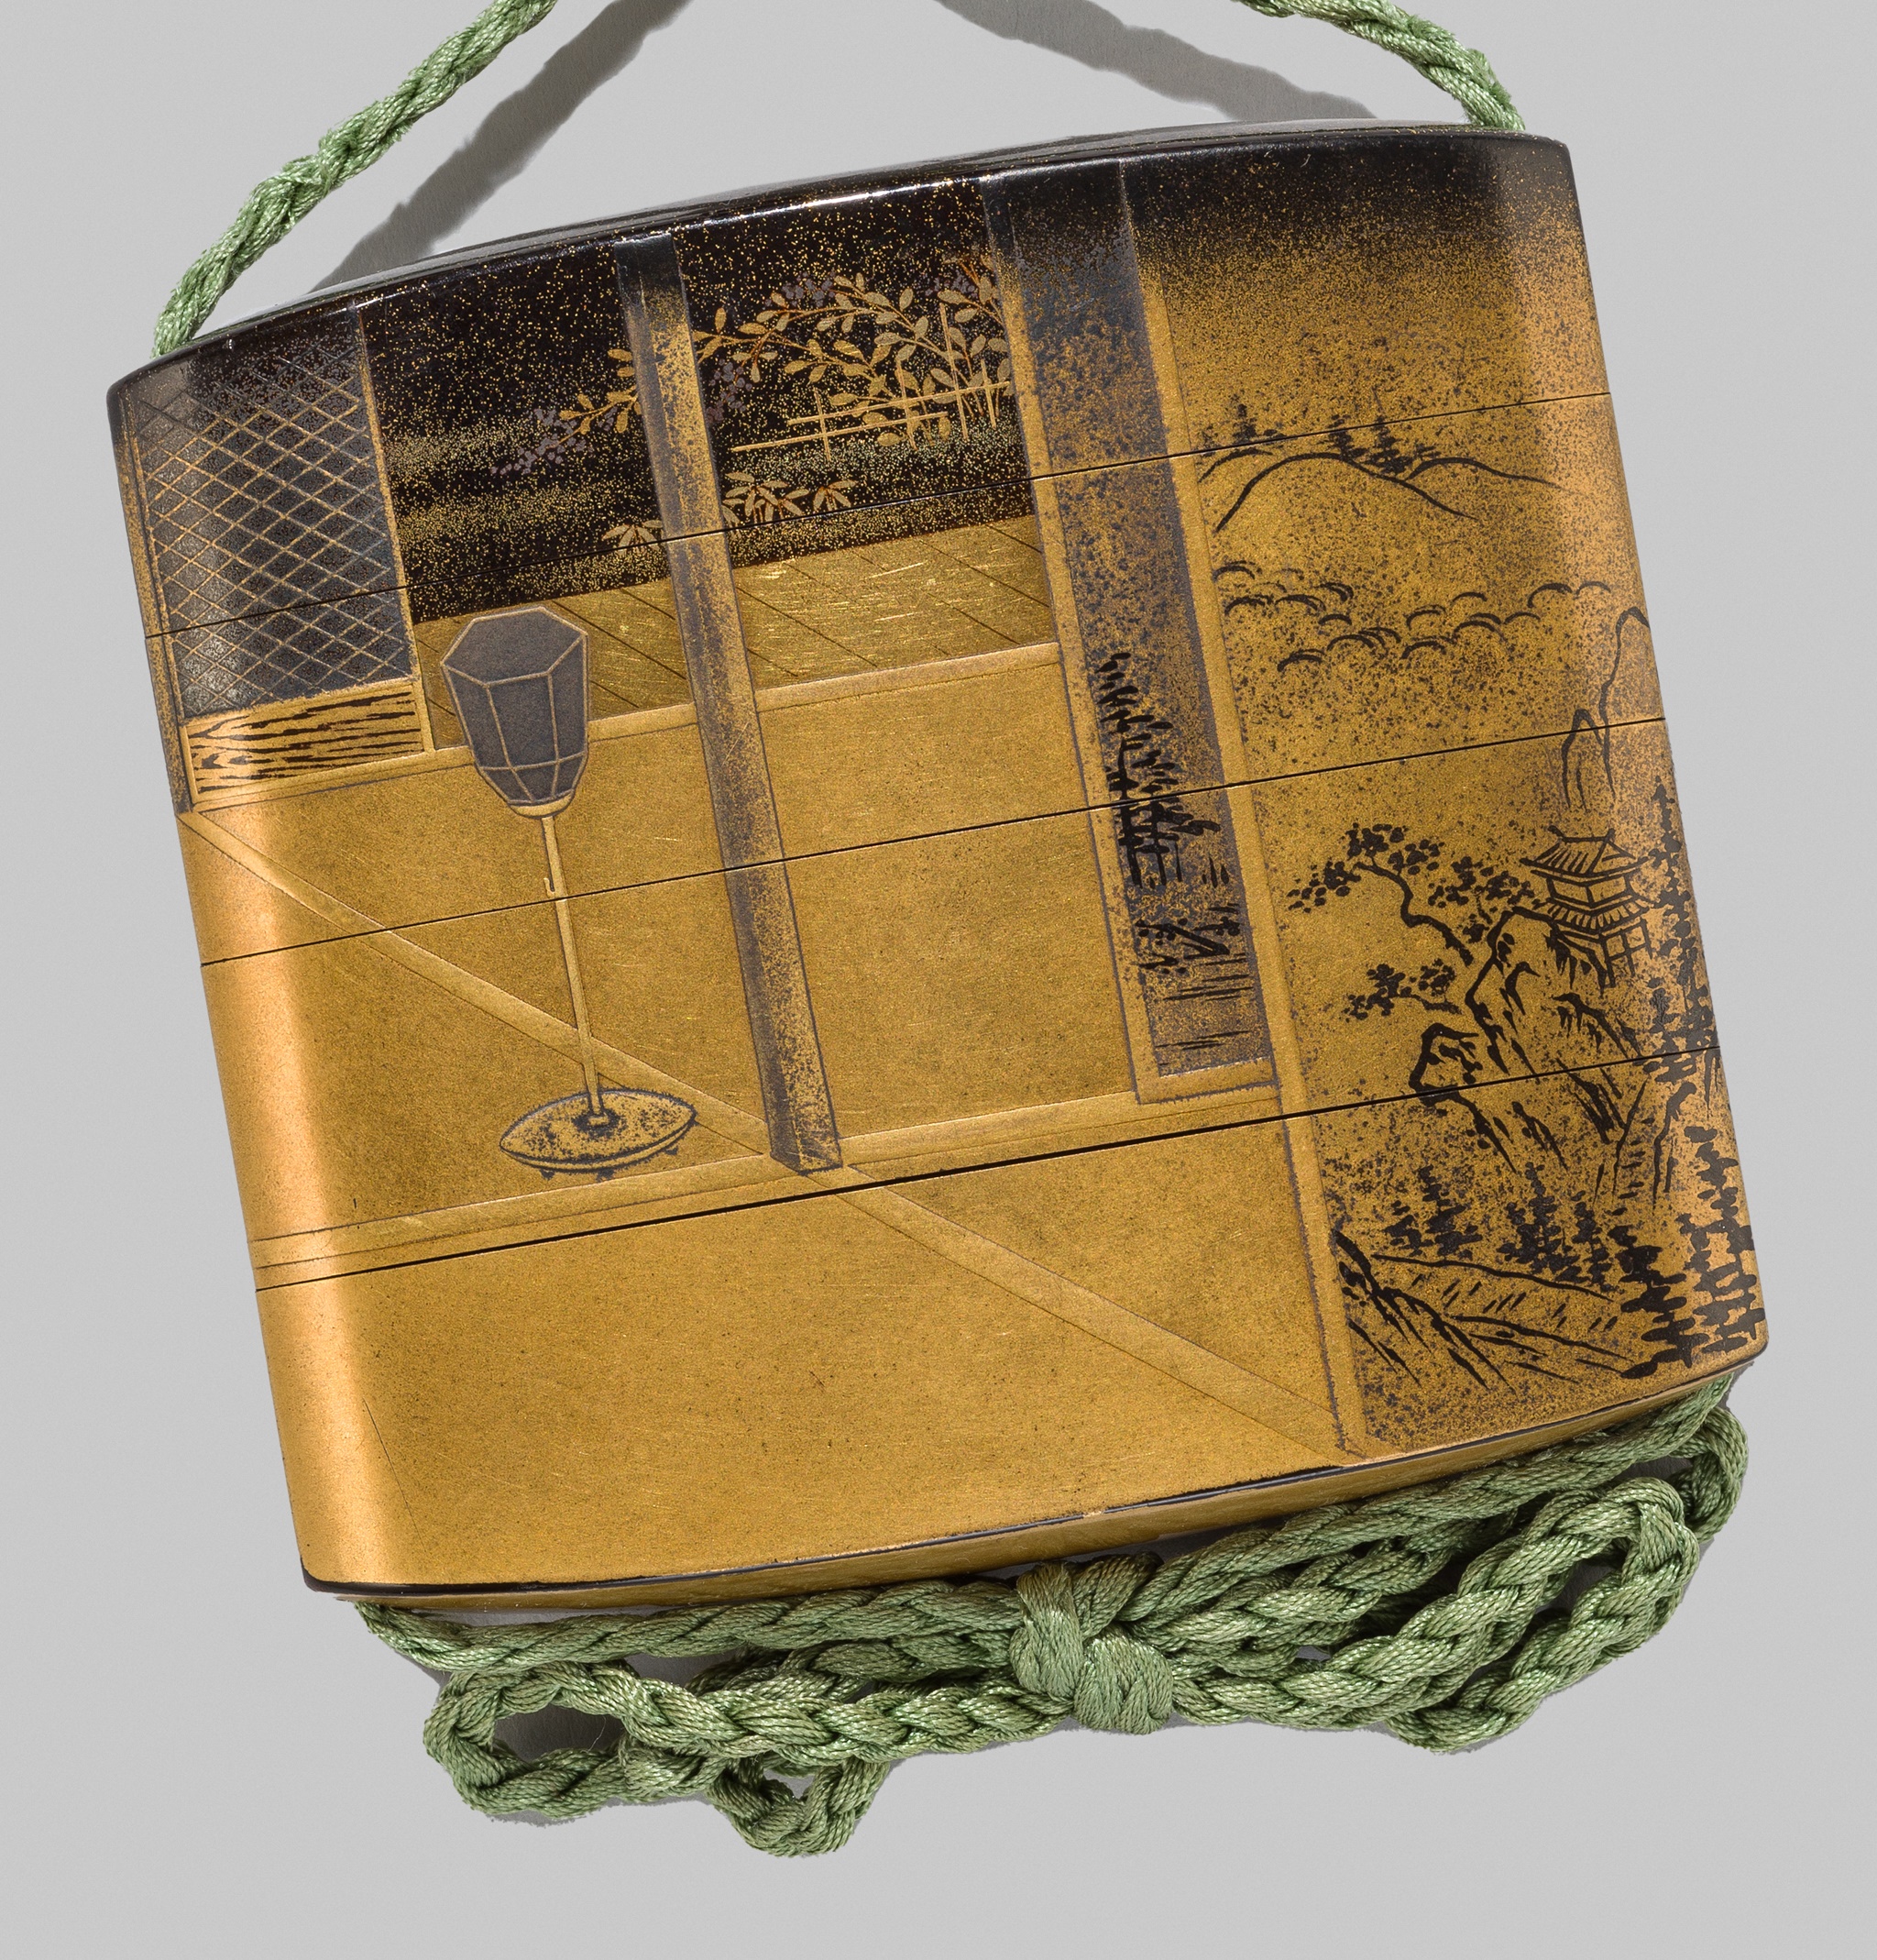 INAGAWA SENRYU: A FINE TOGIDASHI LACQUER THREE-CASE INRO DEPICTING A SCENE FROM THE TALE OF GENJI - Image 2 of 12